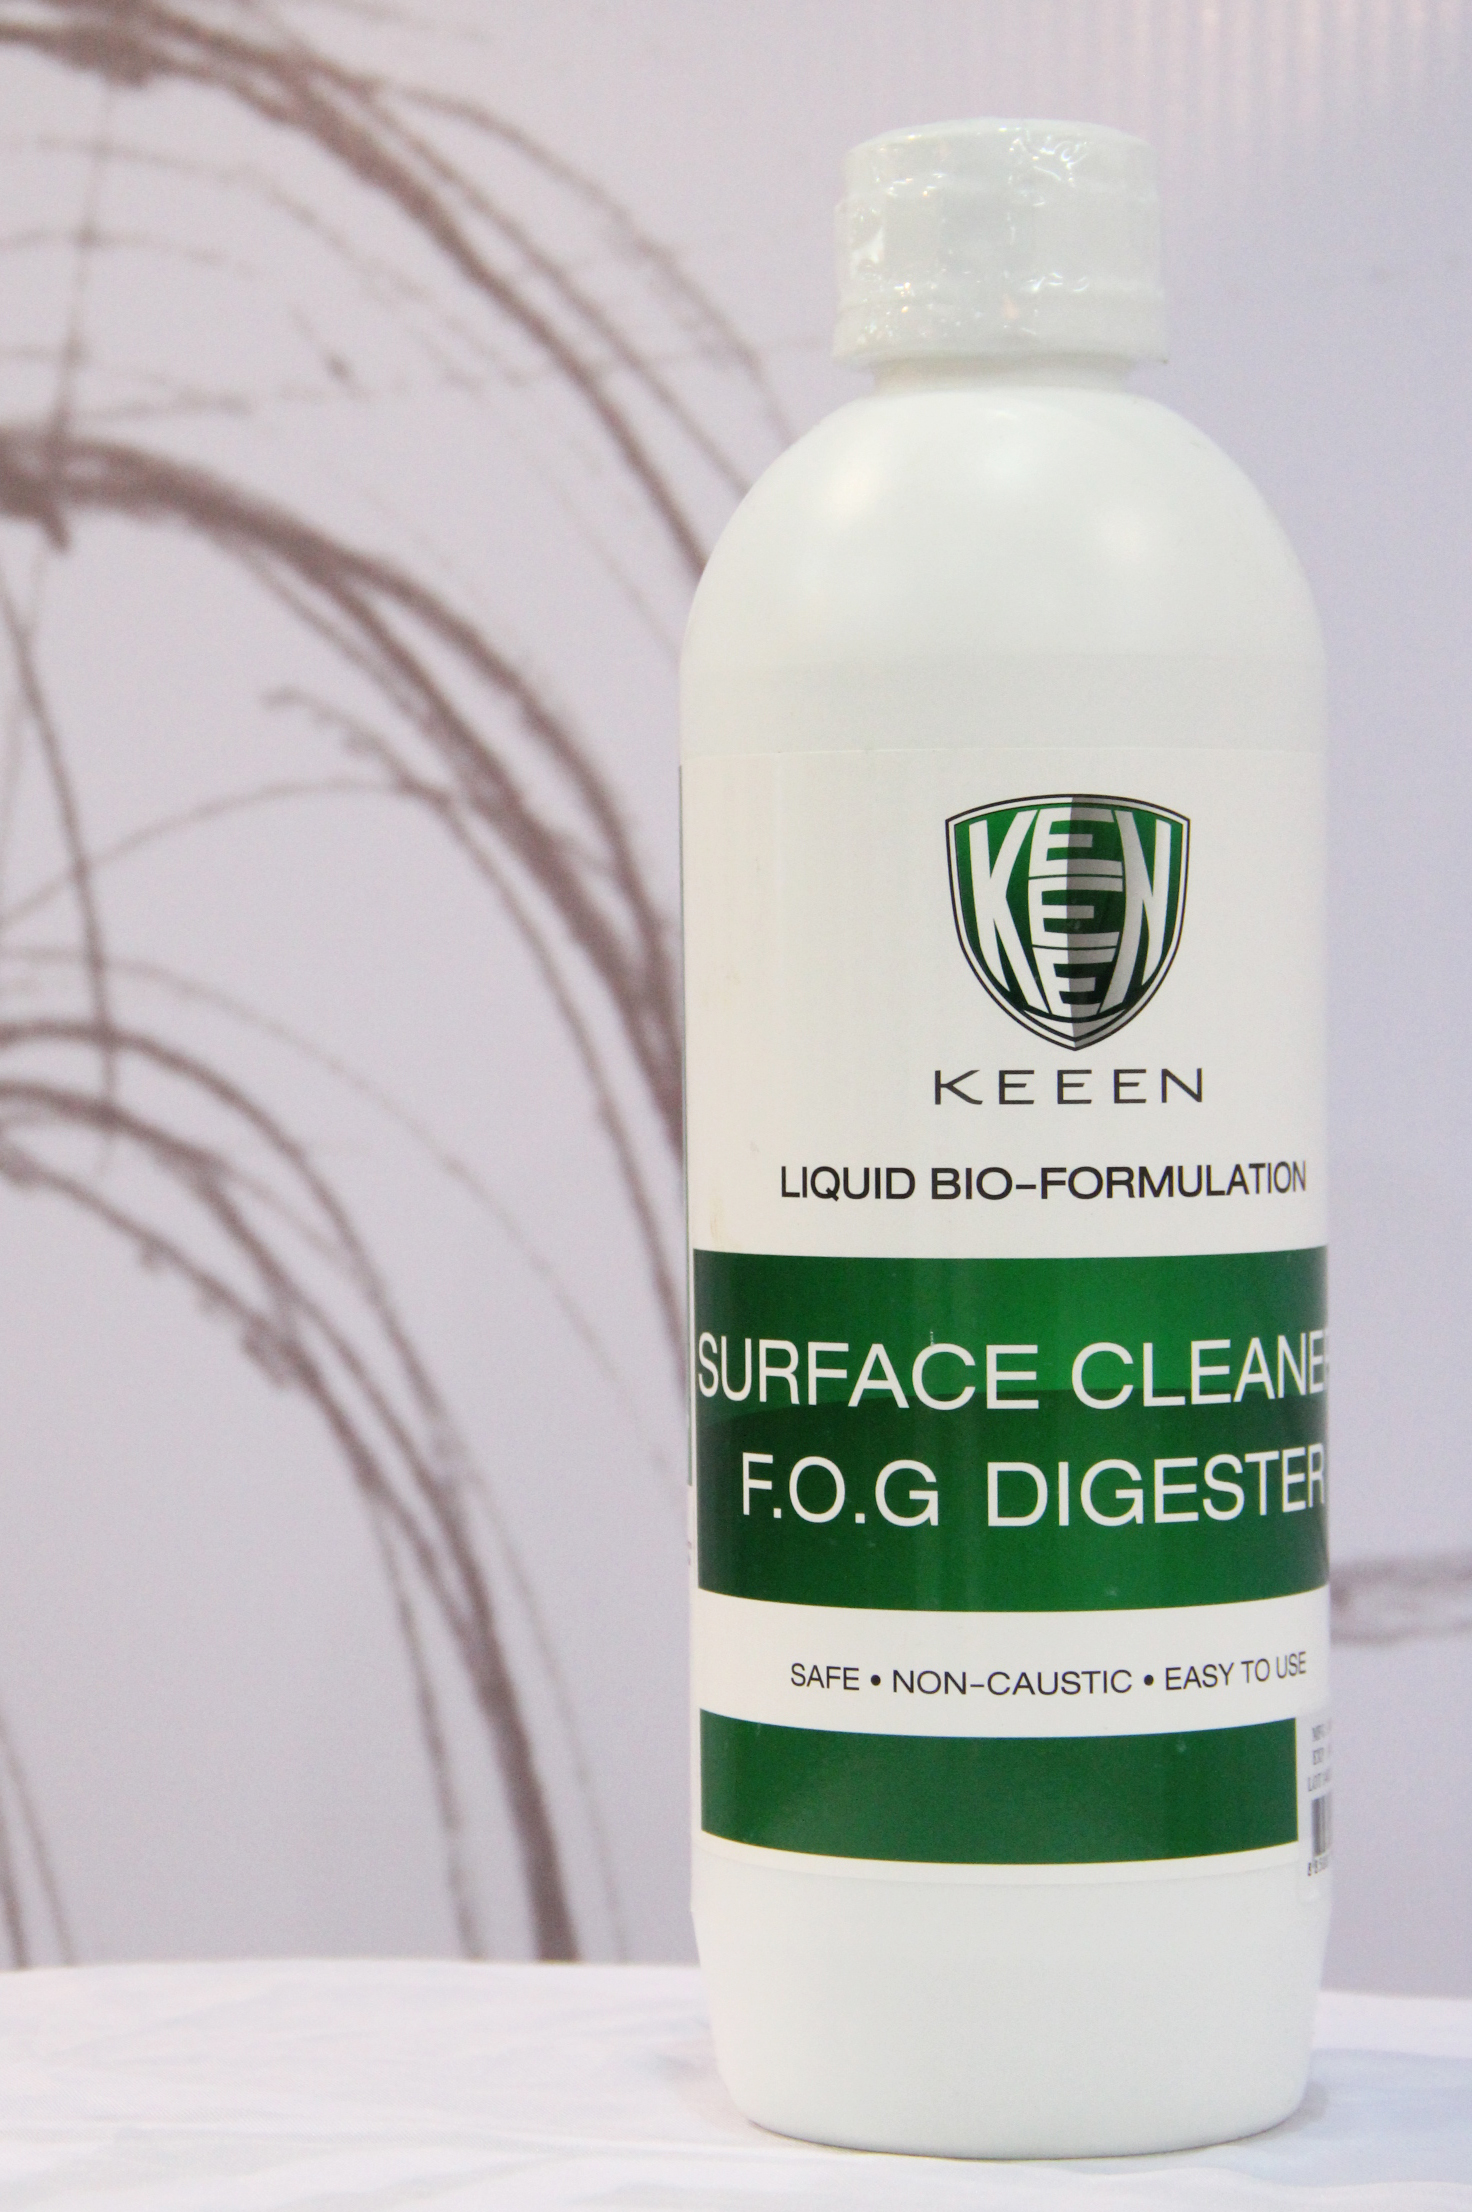 01 - Surface Cleaner - F.O.G Digester*